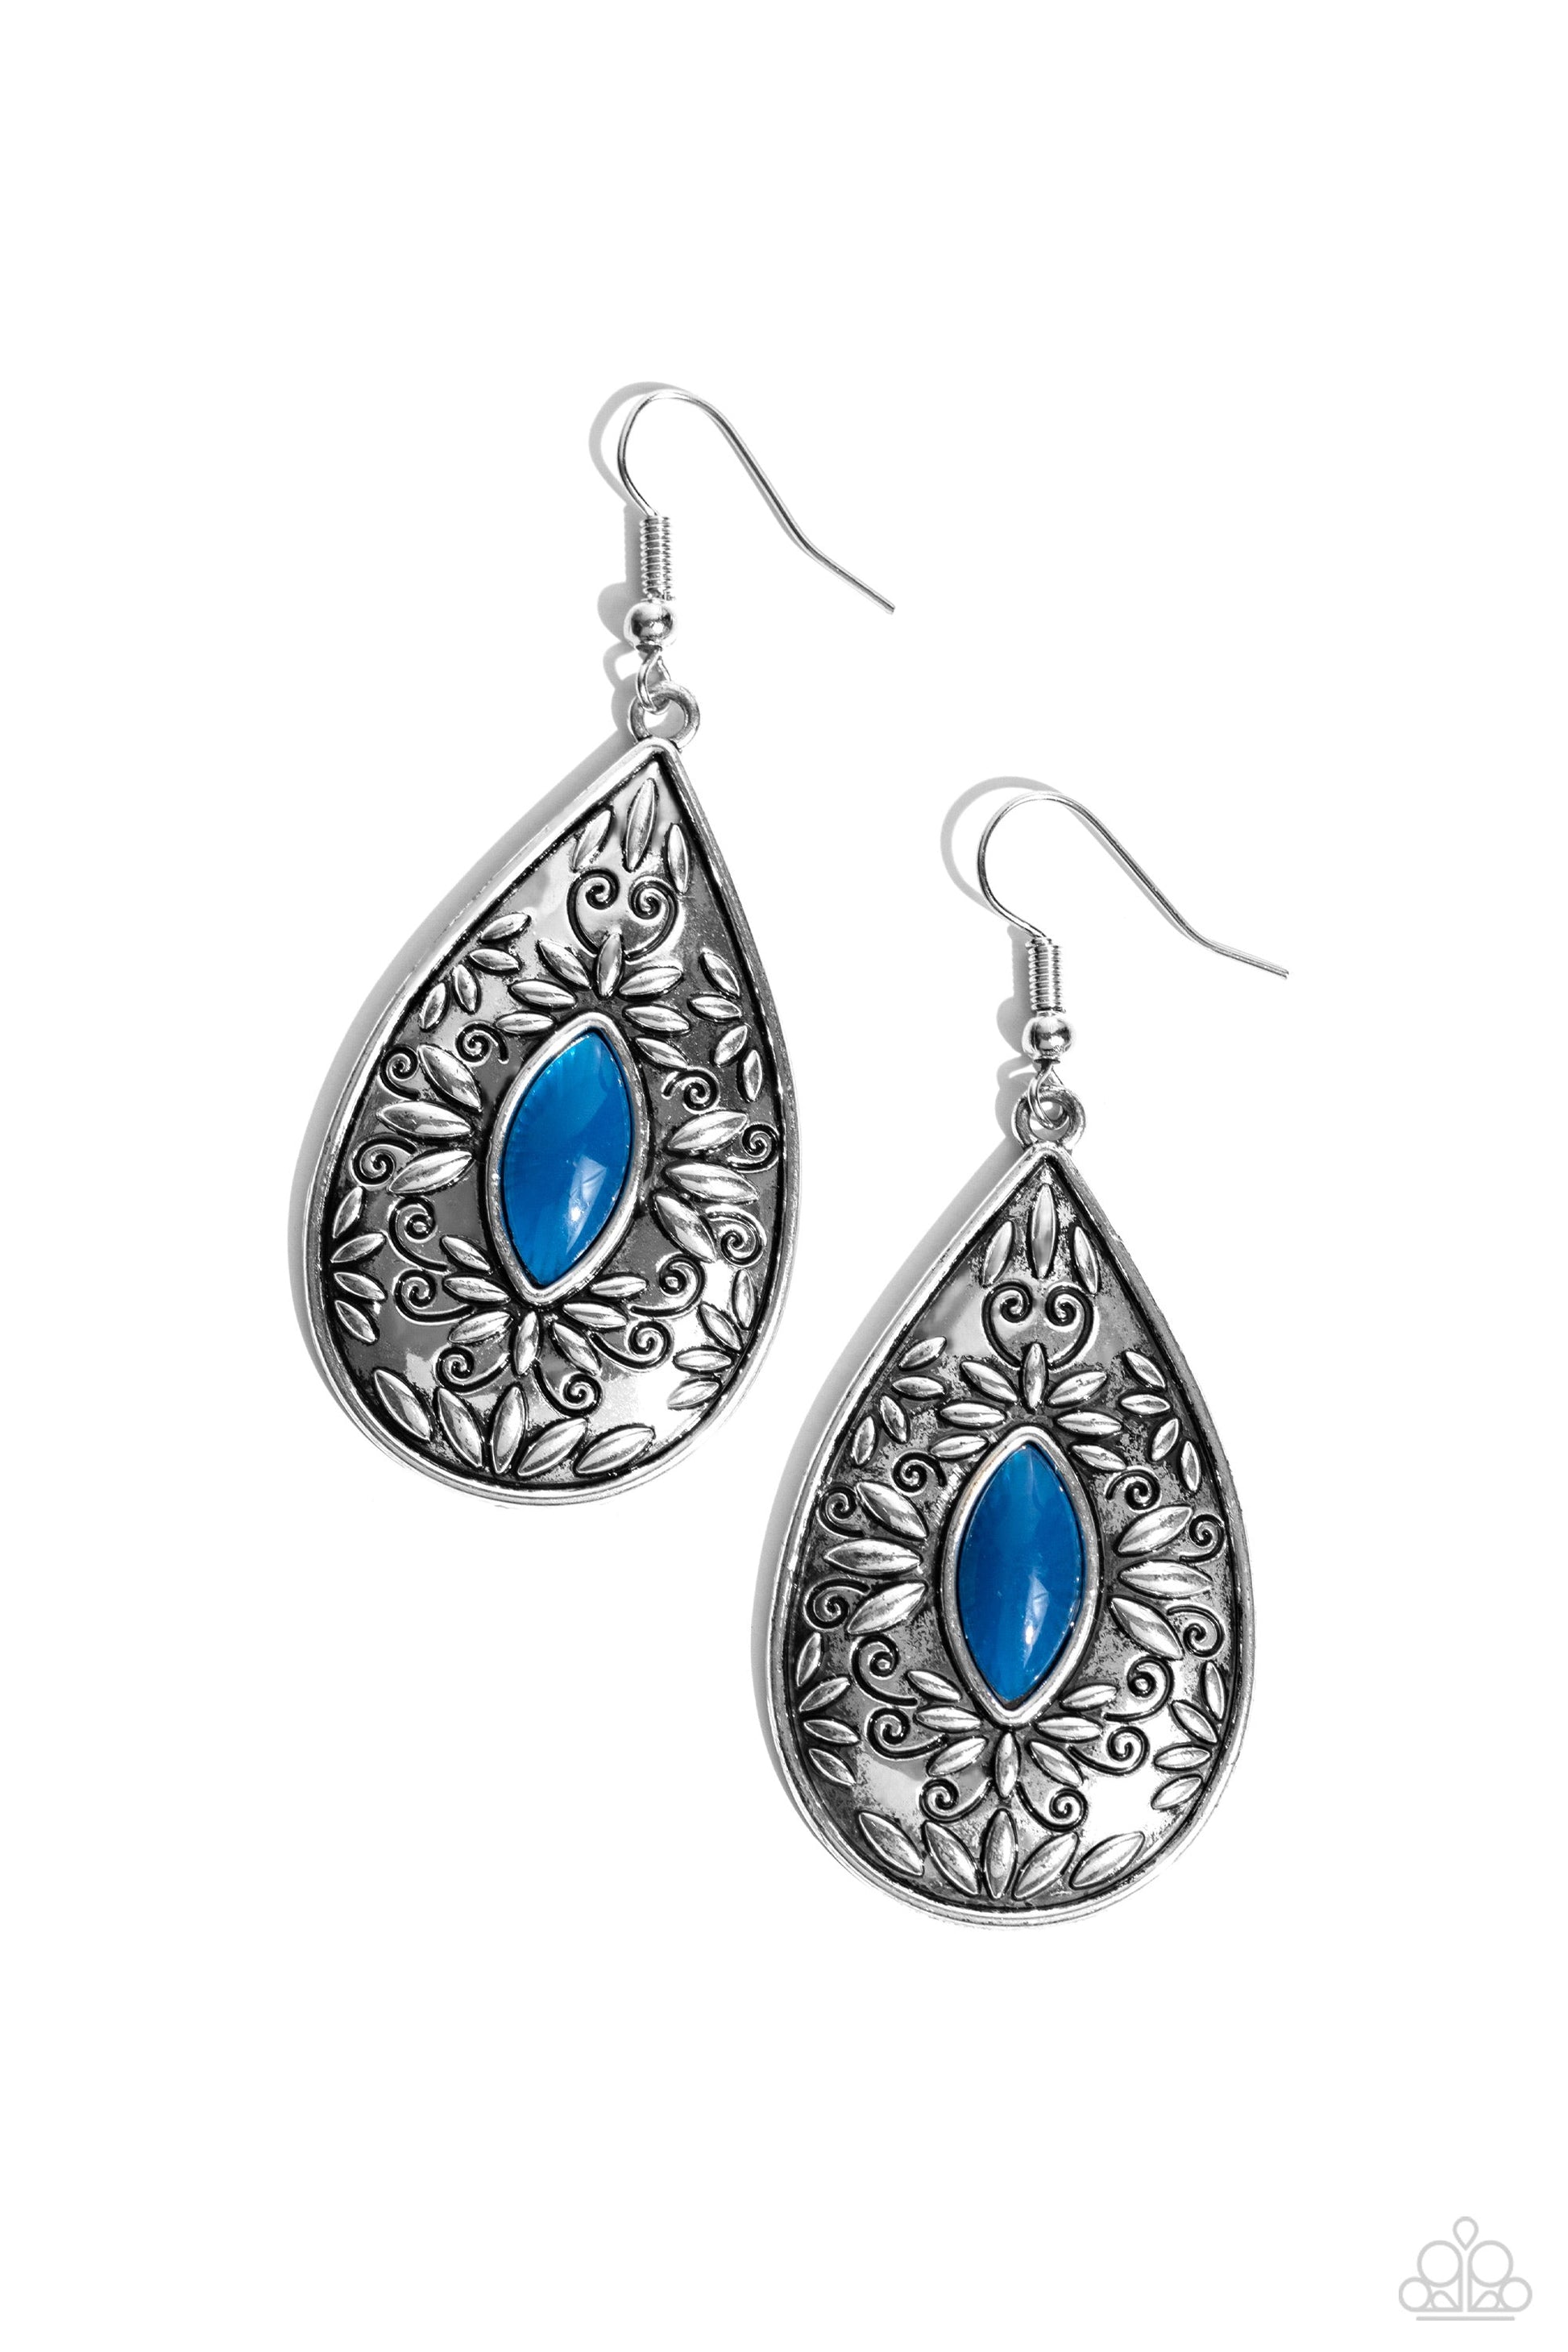 Two PERENNIALS in a Pod - Blue and Silver Earrings - Paparazzi Accessories - A marquise shaped Mykonos Blue bead is pressed into the center of a rustic silver frame stamped and embossed in floral details, creating a seasonal pop of color.